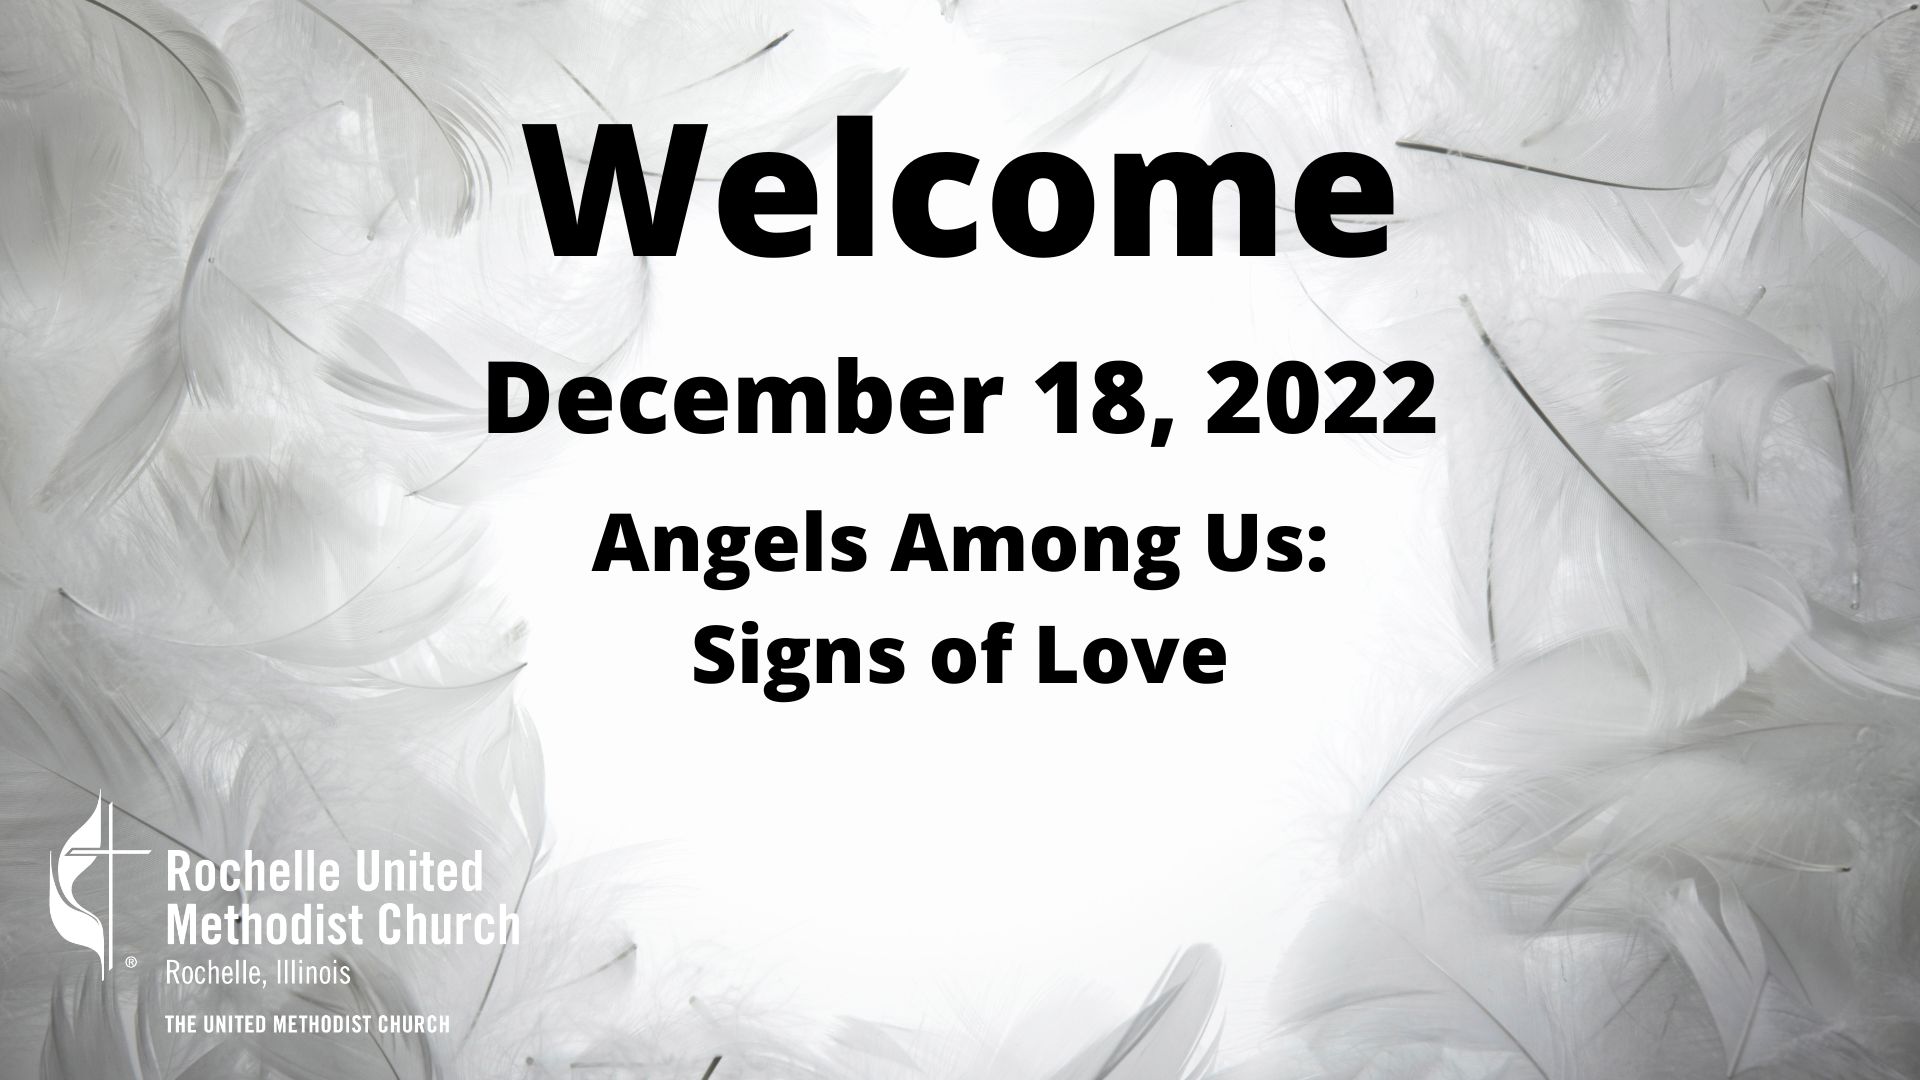 Angels Among Us Signs of Love